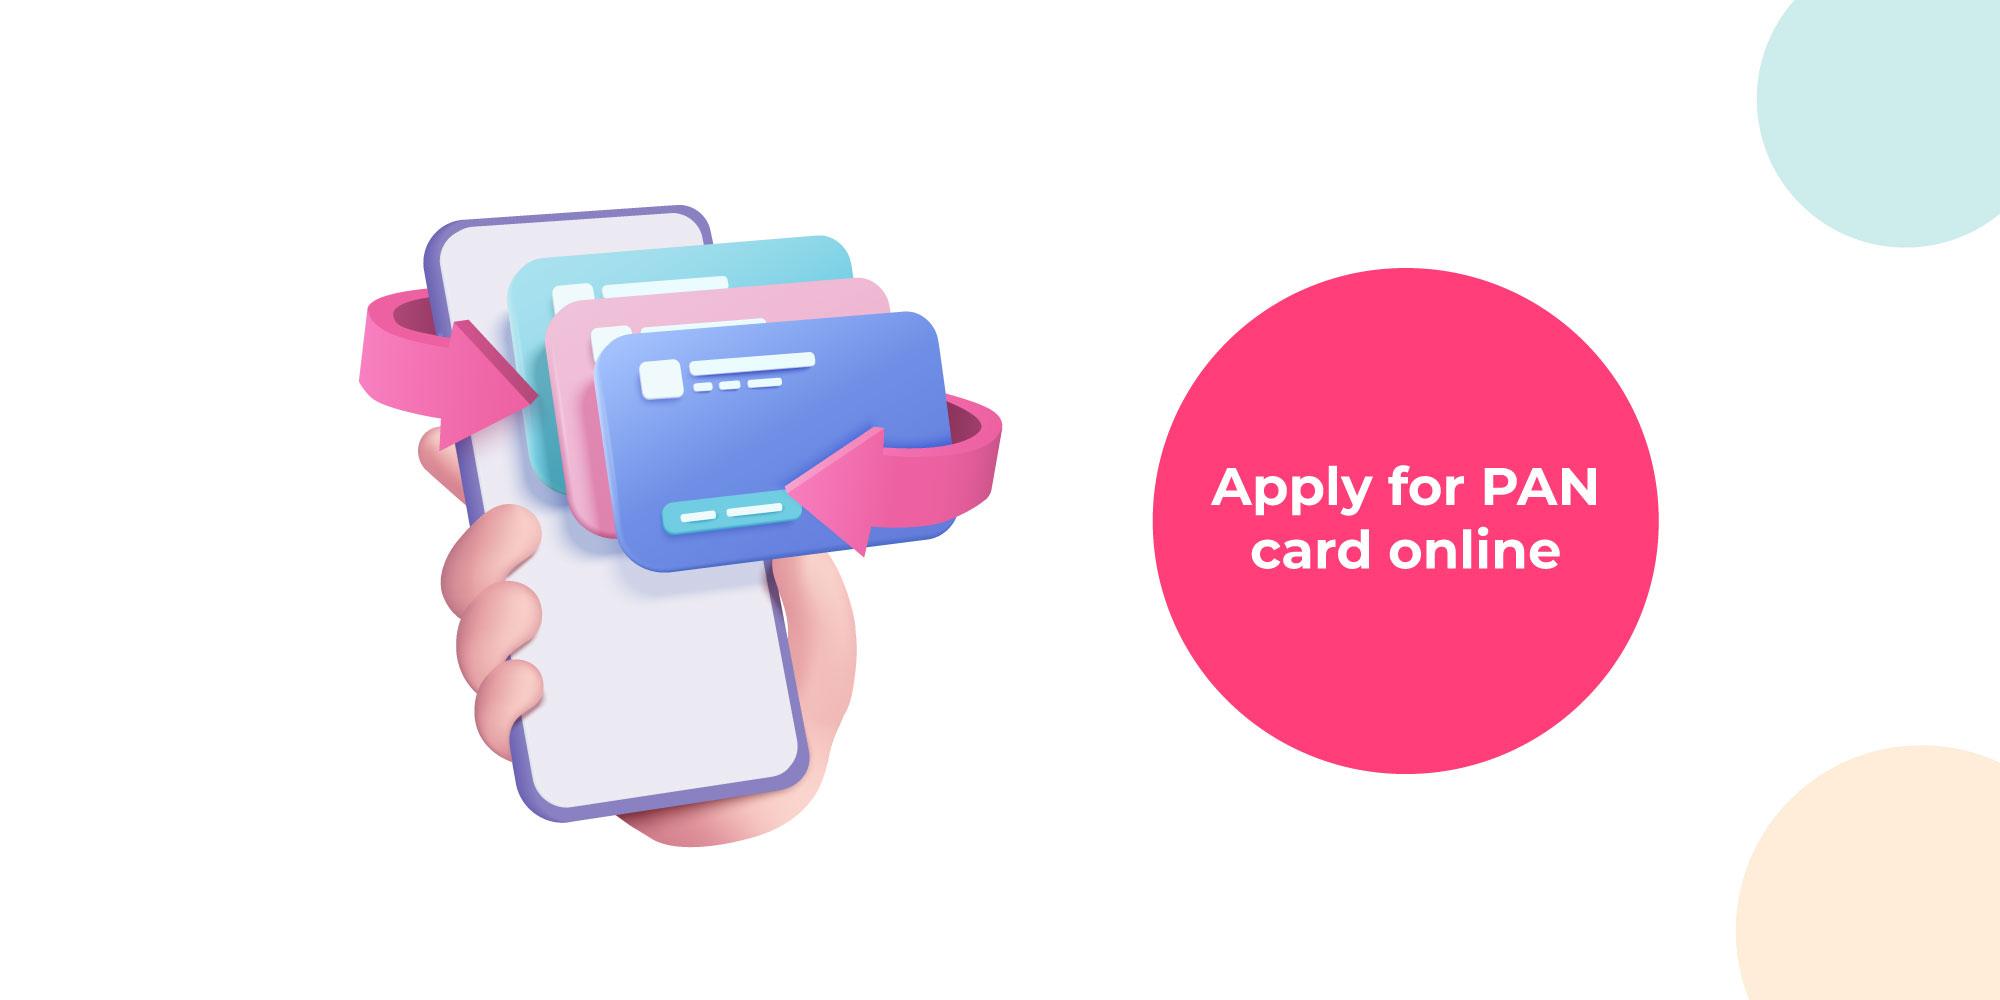 How to Apply for PAN Card Online in 2023? Here are the important steps to know